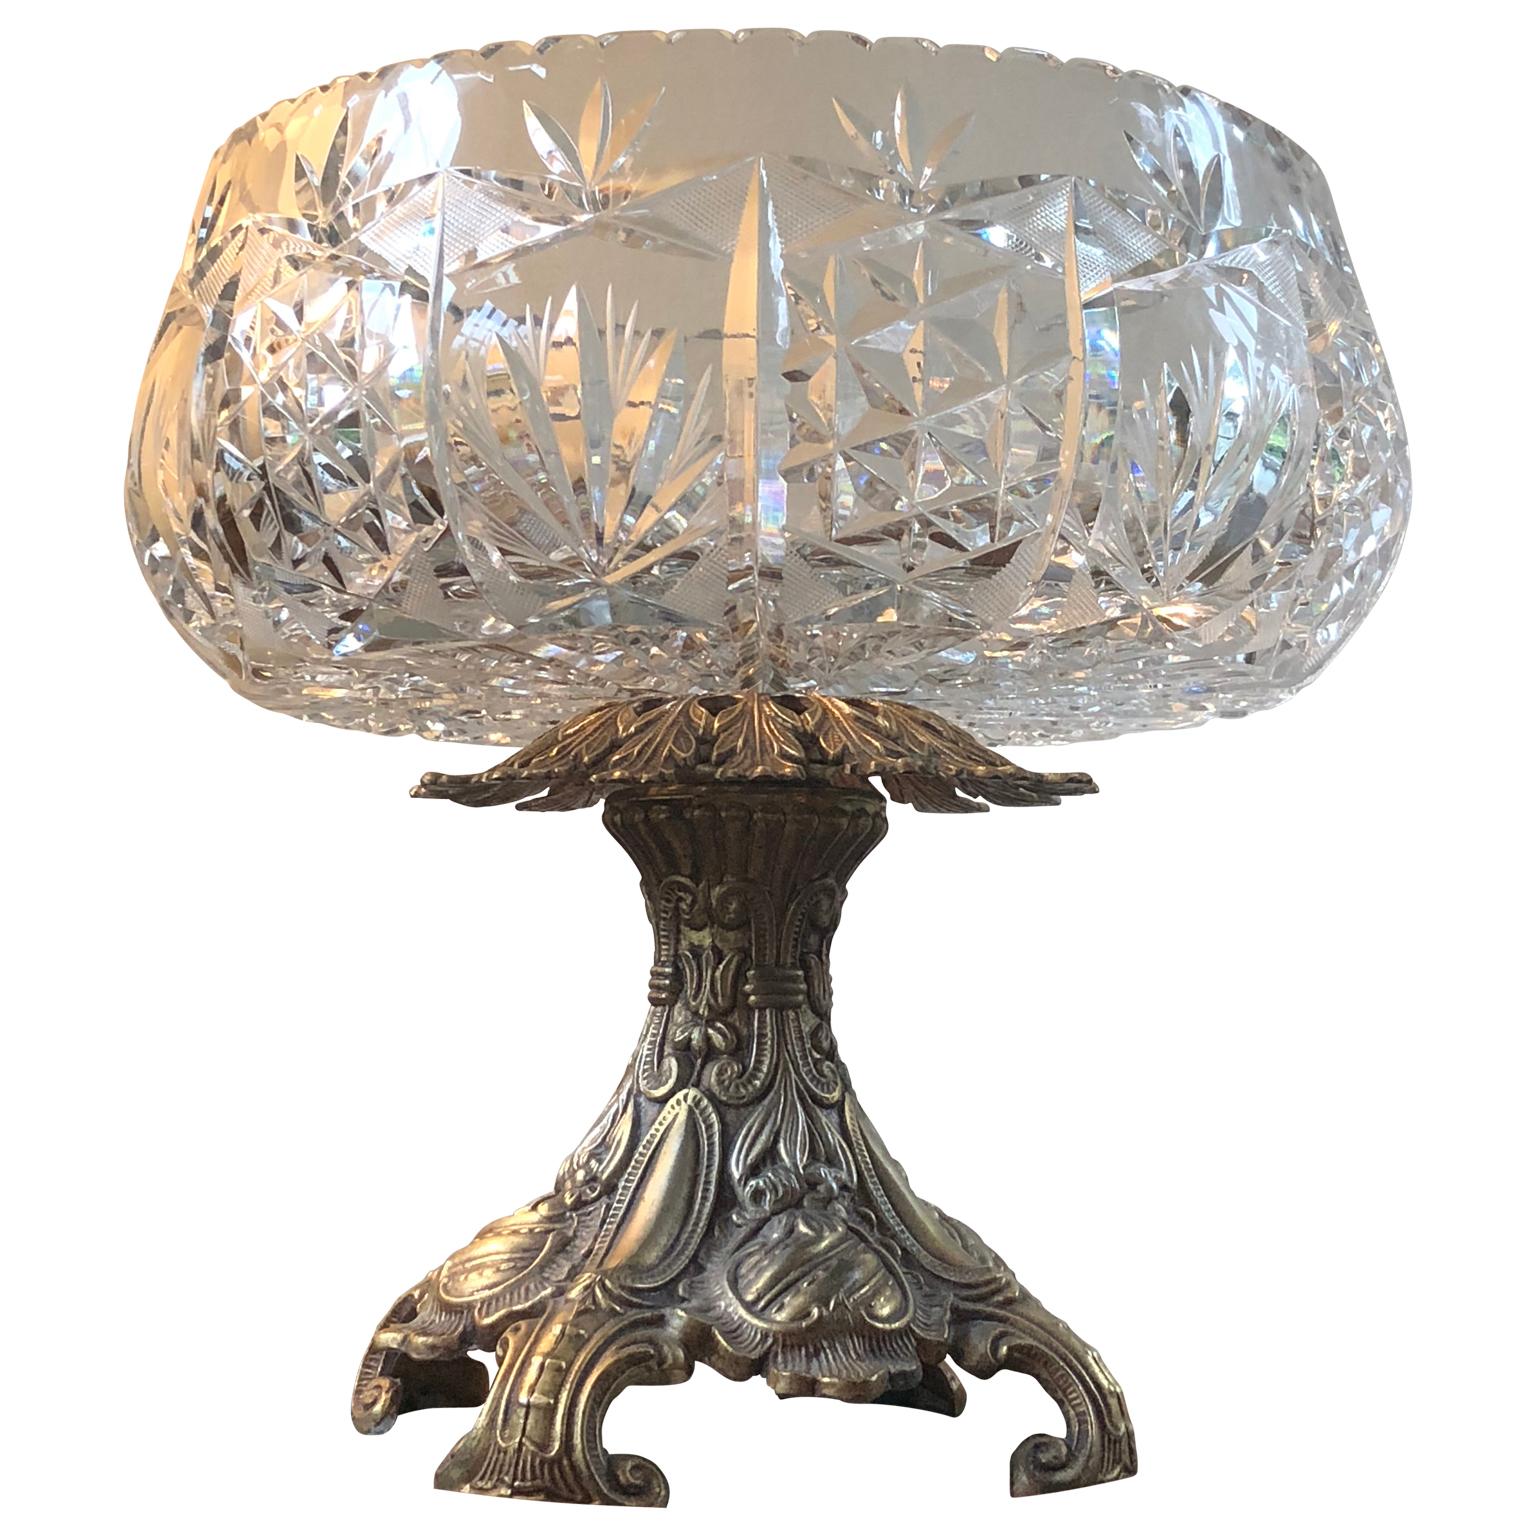 Victorian Large Crystal Centerbowl On Rococo-style Bronze Stand